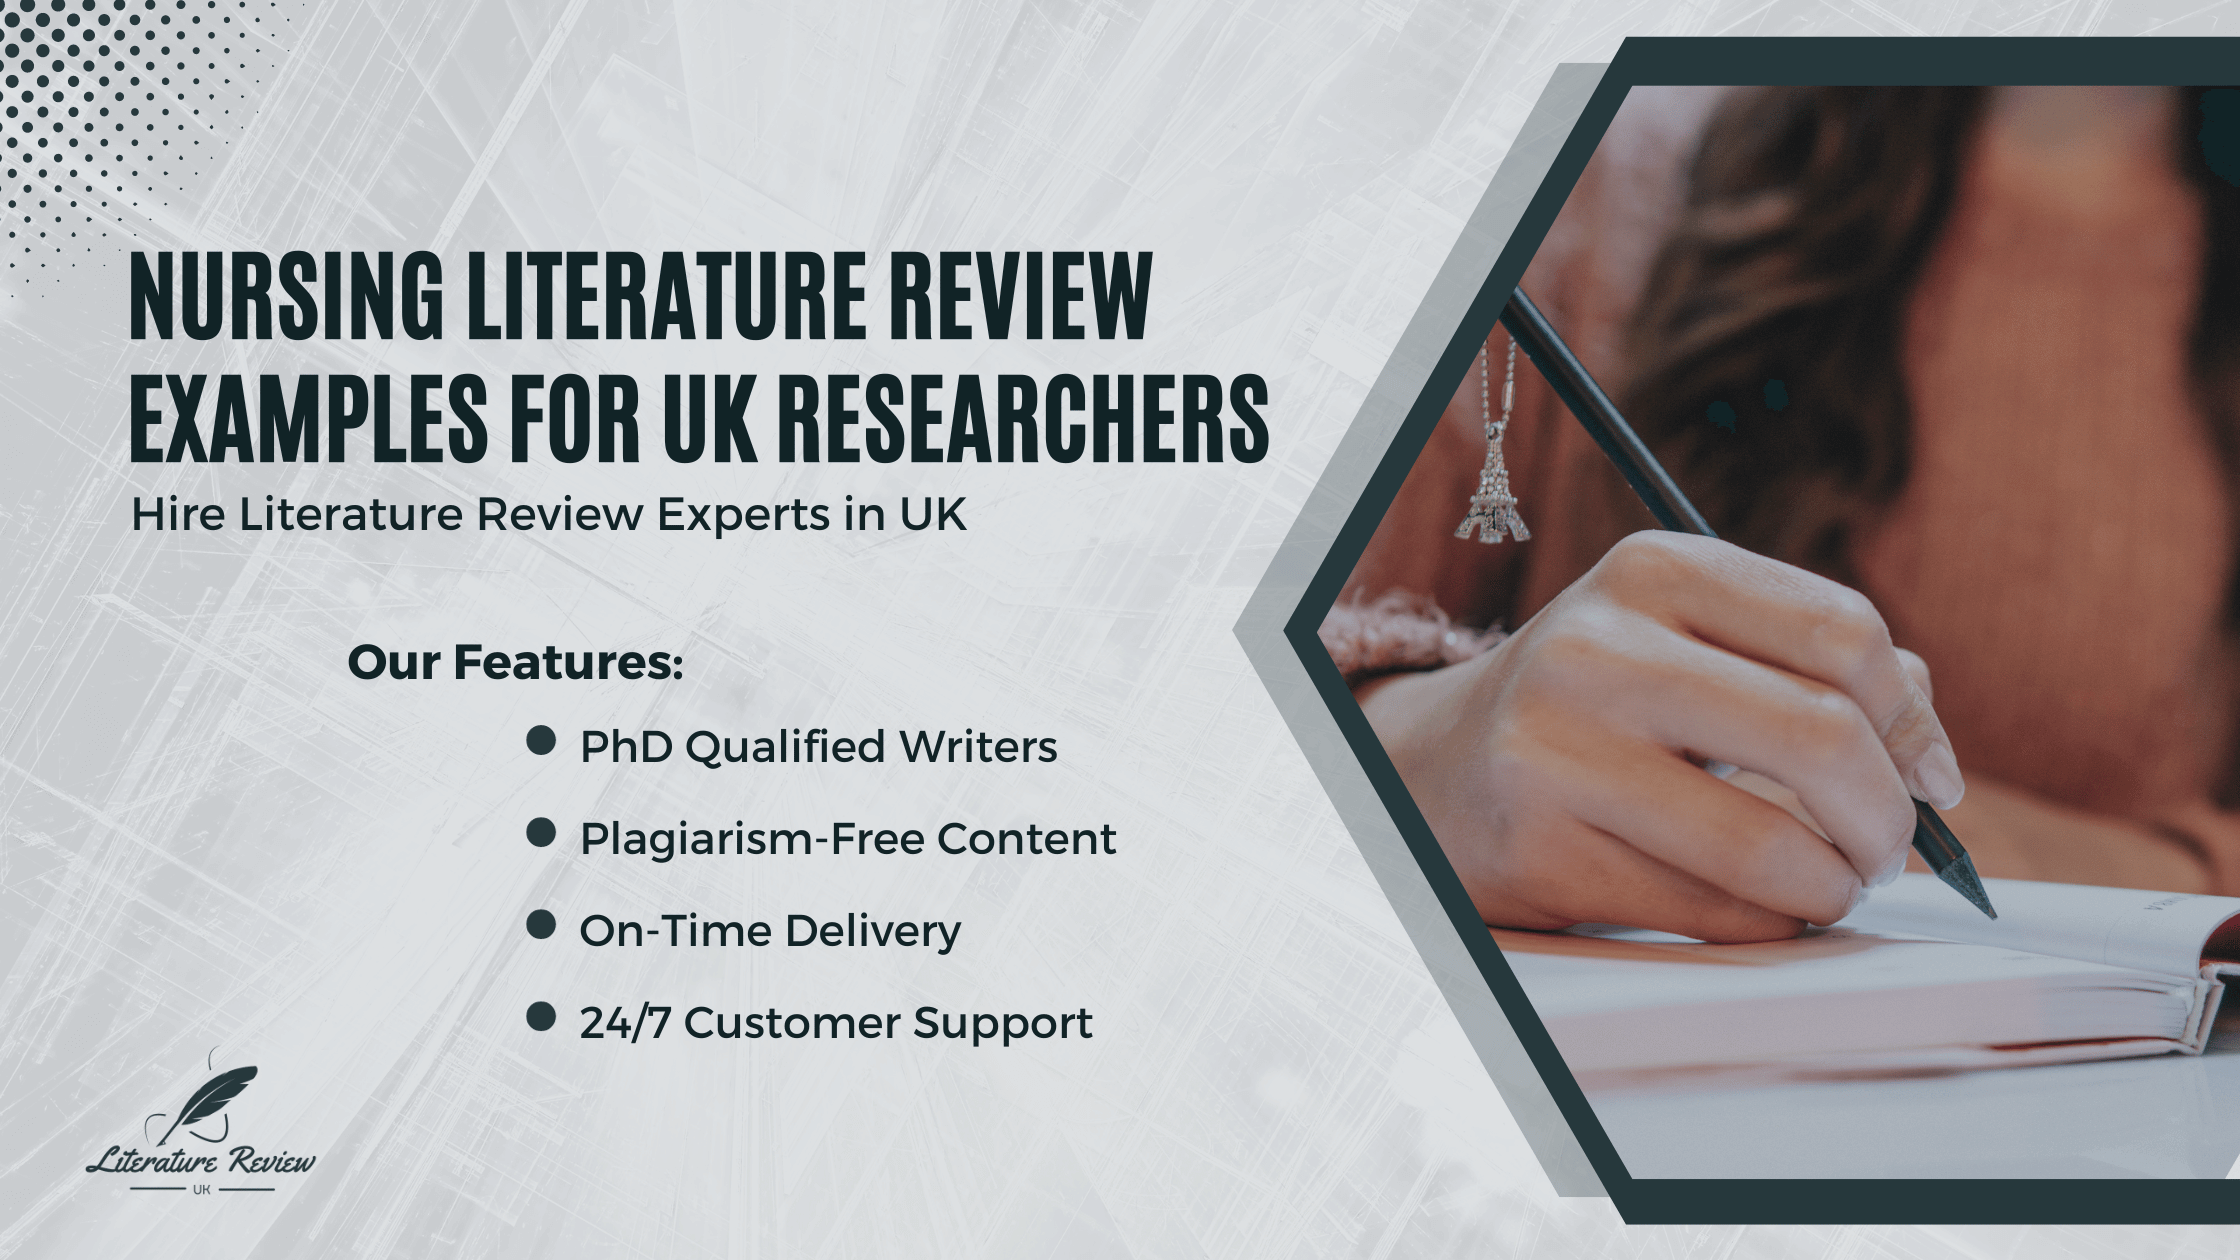 Top Nursing Literature Review Examples for UK-Based Researchers